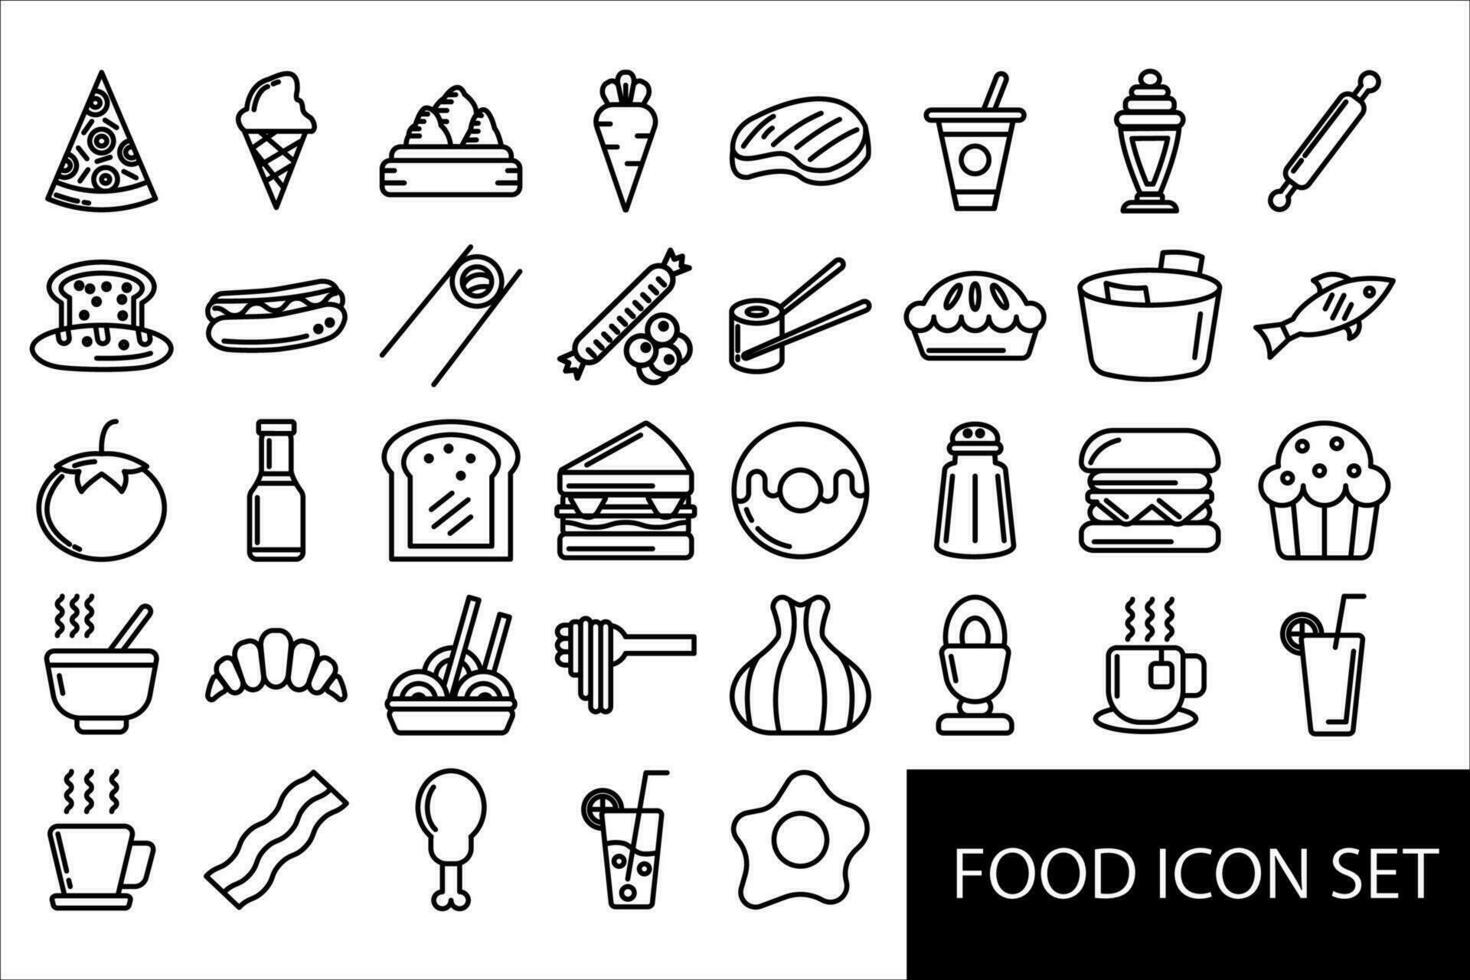 food icon set line style for your design vector